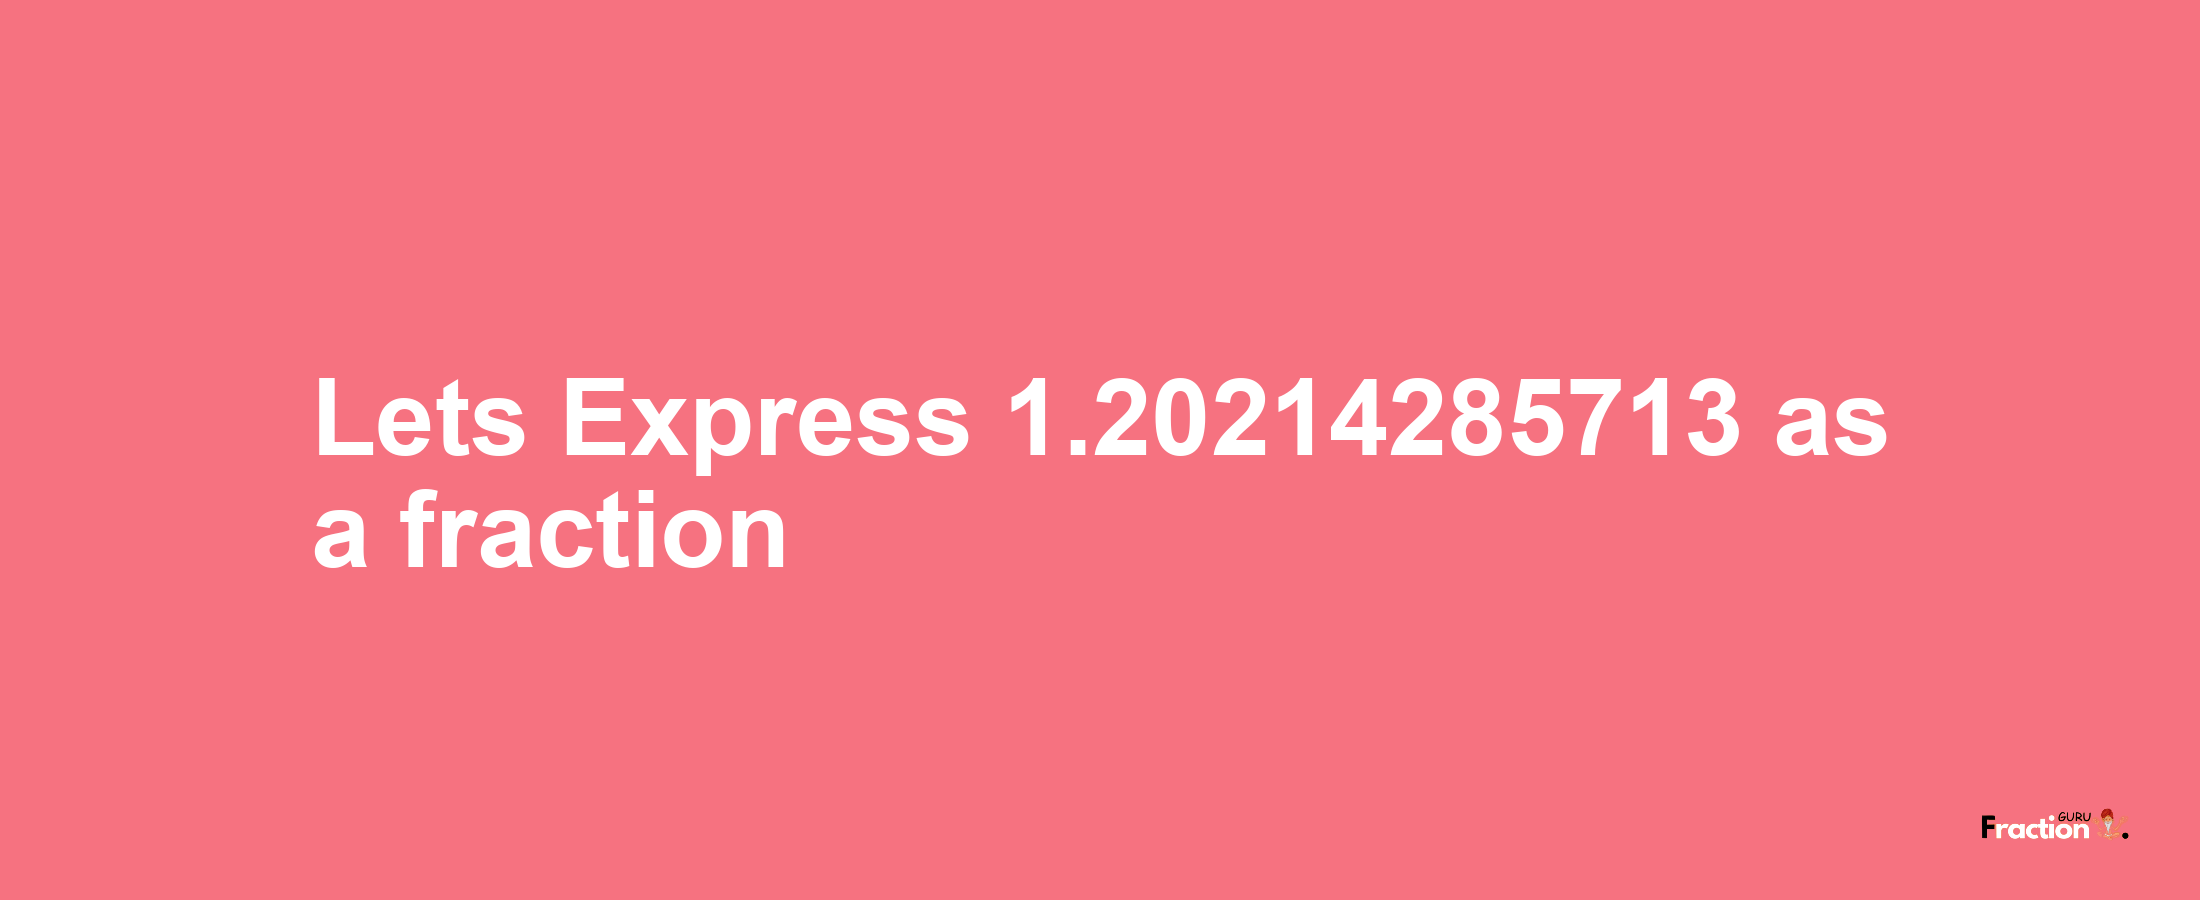 Lets Express 1.20214285713 as afraction